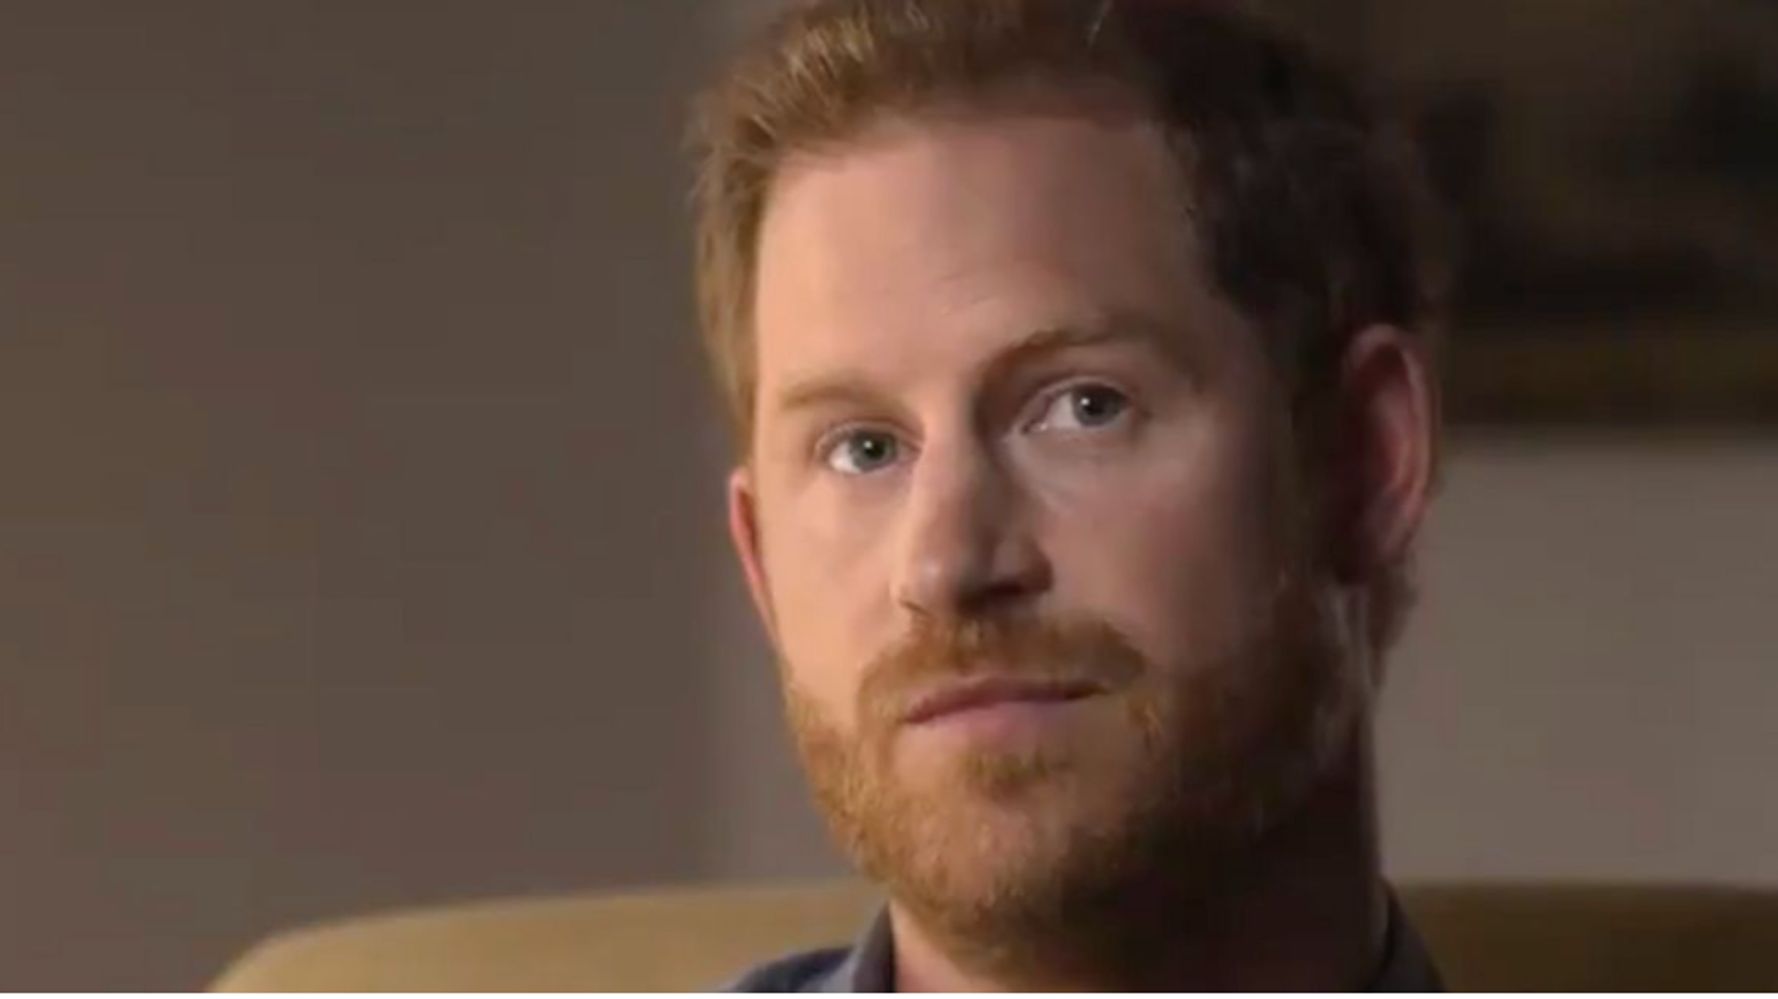 Prince Harry And Robin Williams’ Son Open Up About Shared Experience Of Public Grief